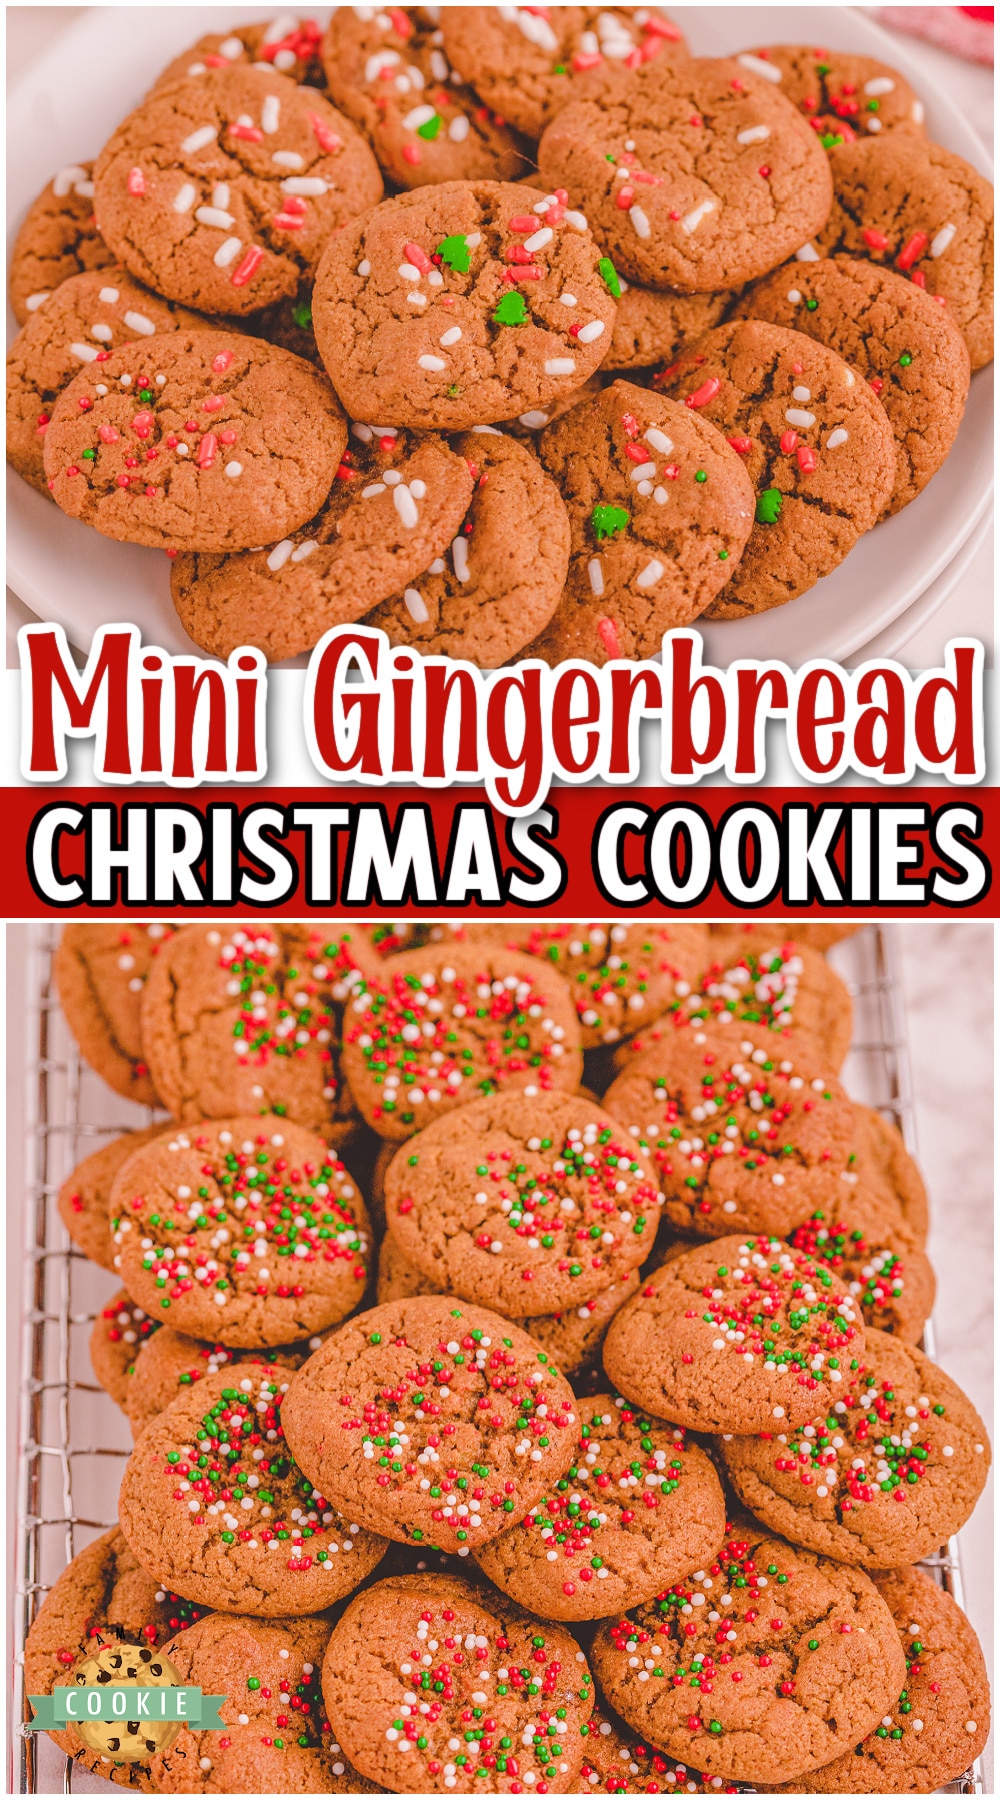 Mini gingerbread cookies made from scratch & ready for your Christmas party! Perfect 2-bite cookies made easy without scooping any cookie dough. Easy method yields over 6 dozen cookies baked in record time!